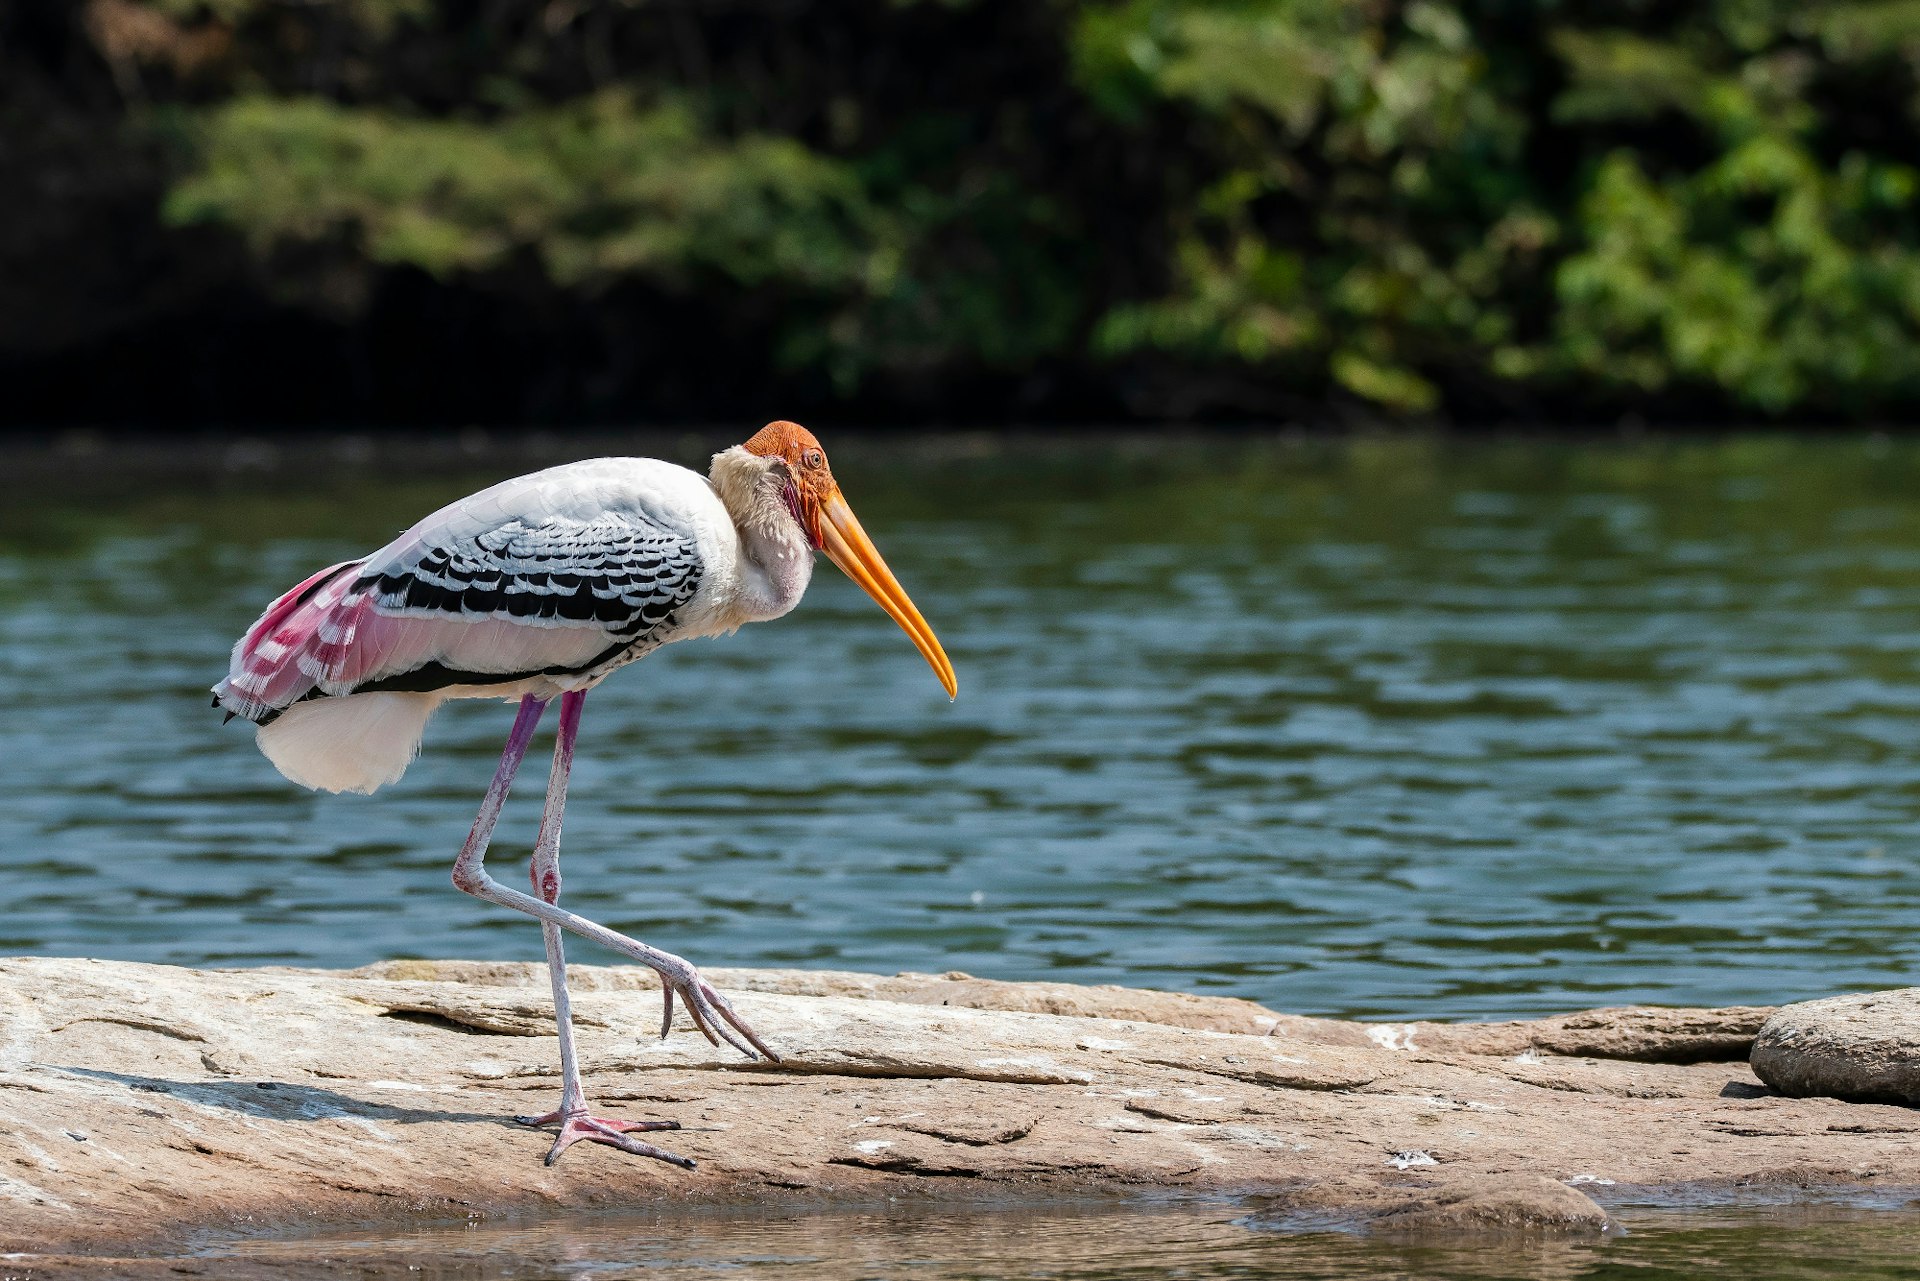 Painted stork on the banks of the Cauvery River © Chaithanya Krishna Photography / Getty Images